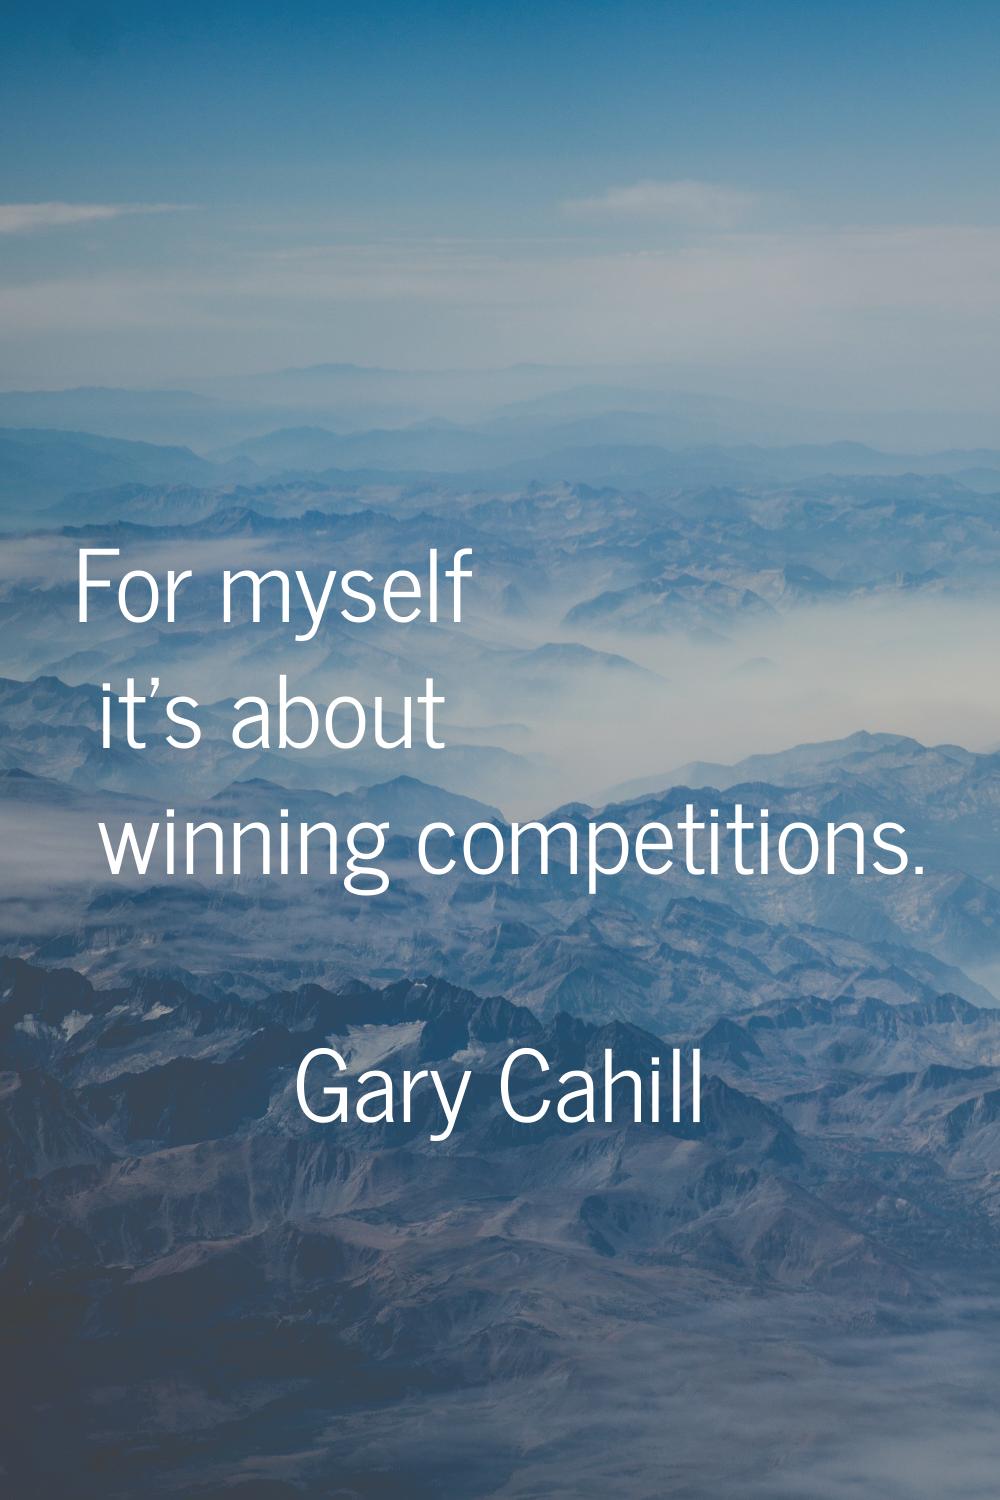 For myself it's about winning competitions.